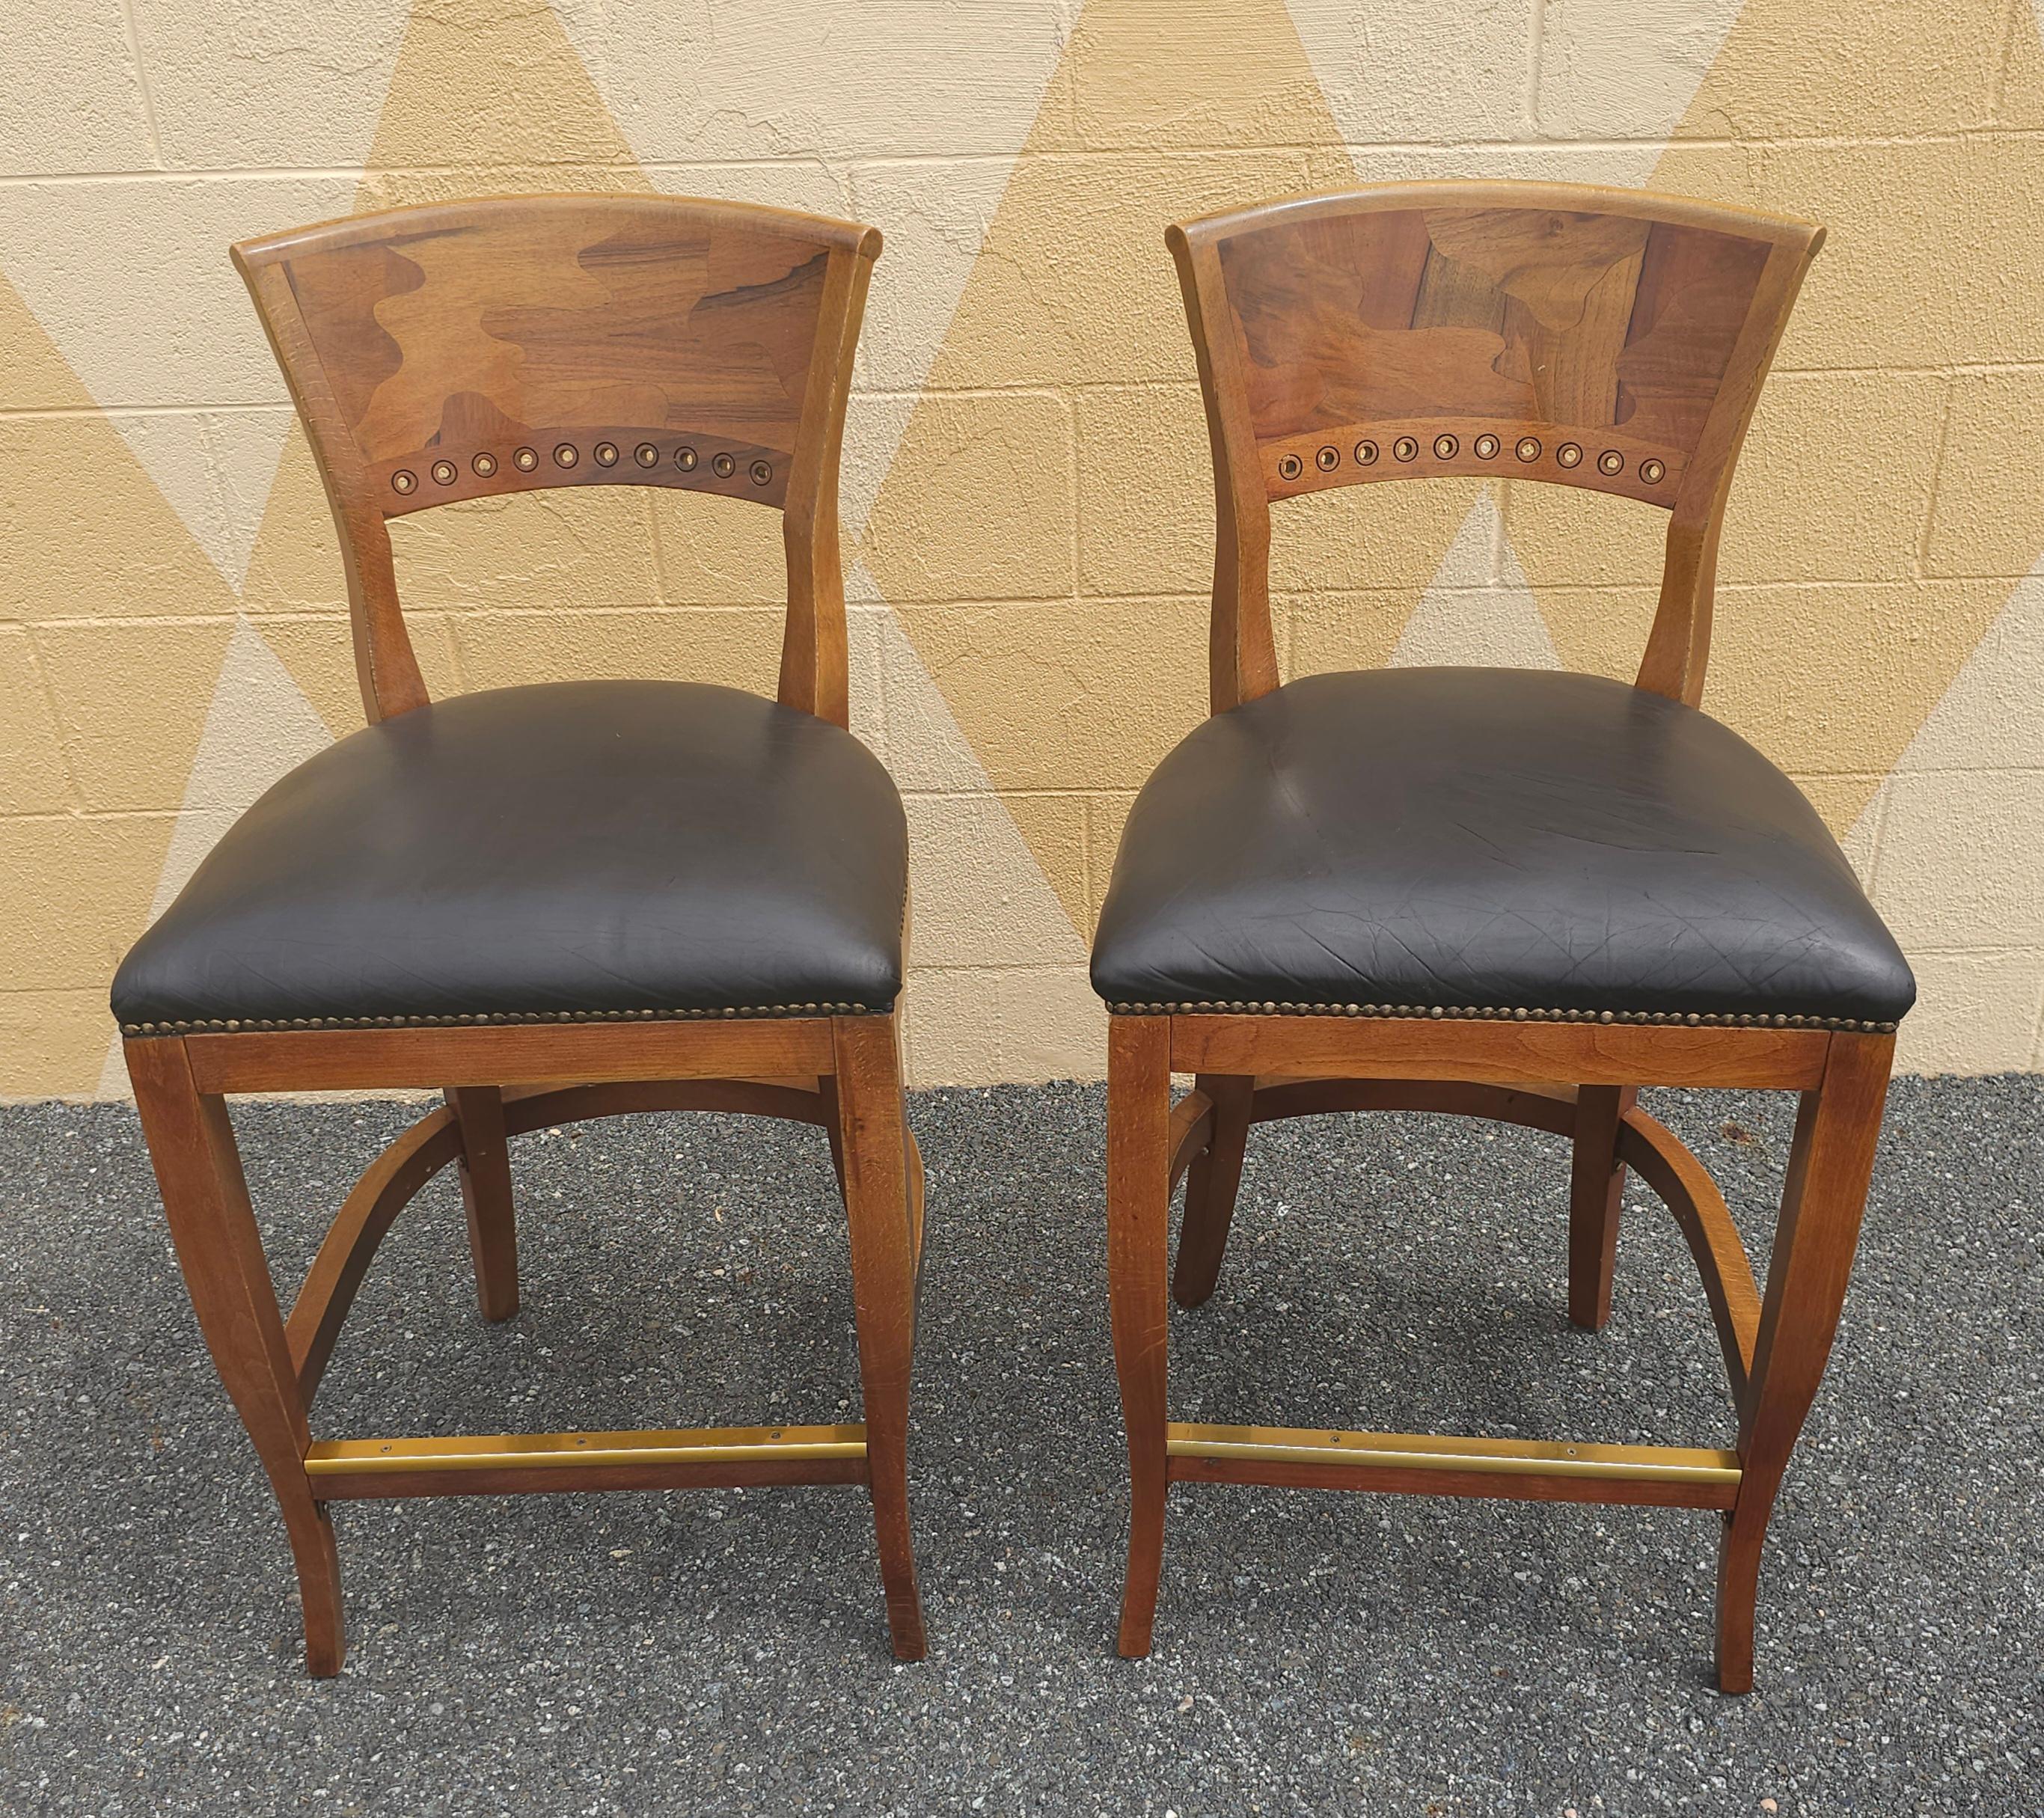 Modern Italian Mixed Fruitwoods Top Grain Leather Upholstery w/ Brass NailHeads Stools For Sale